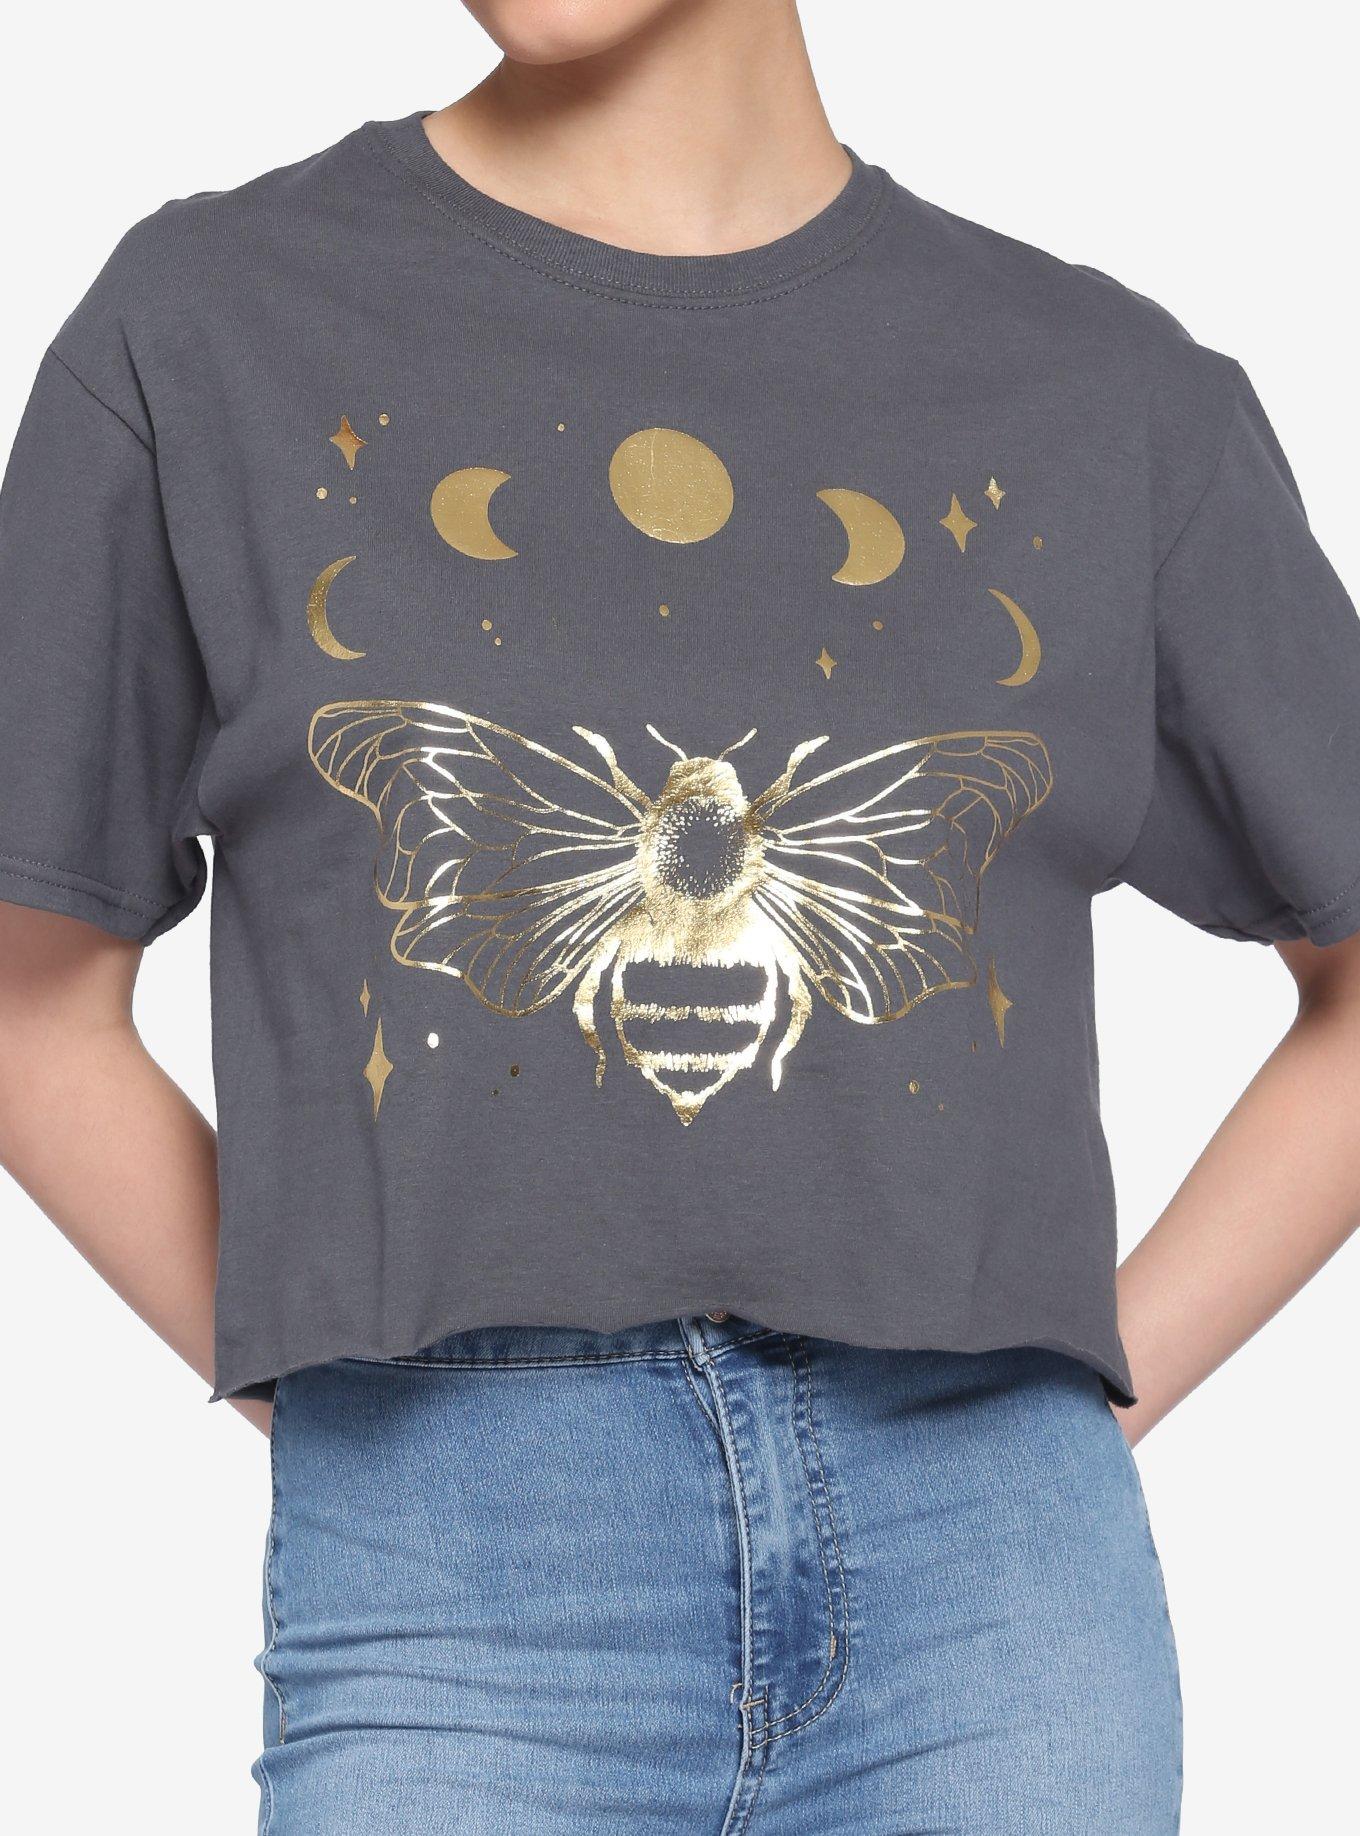 Bee Moon Phase Gold Foil Girls Boxy Crop T-Shirt, GREY, hi-res